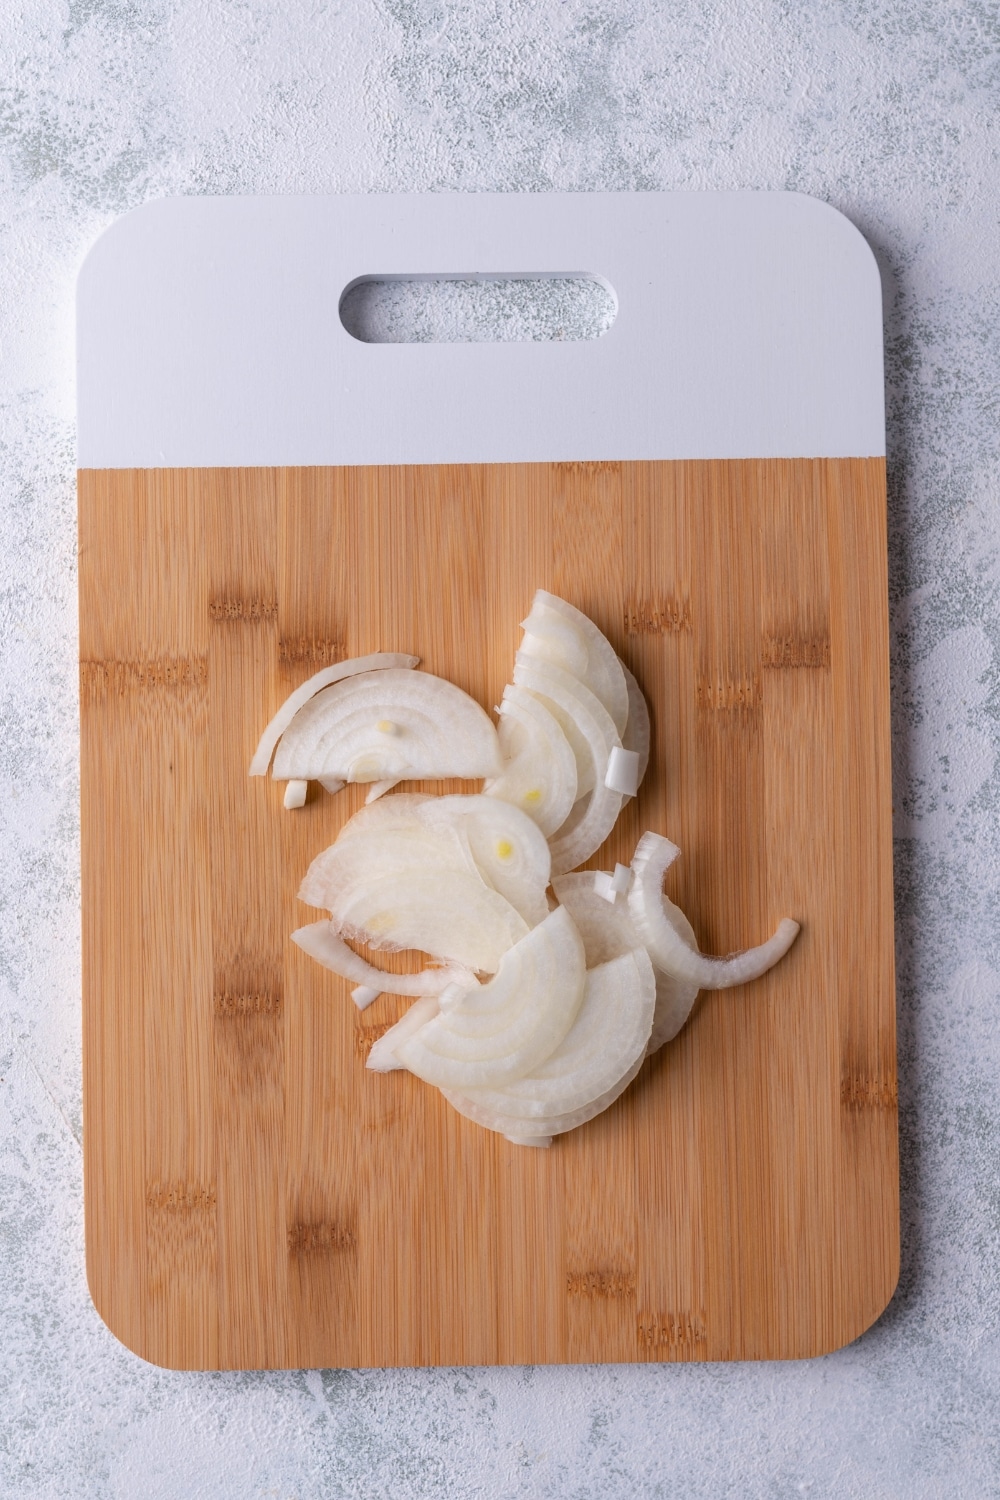 Sliced onion on a bamboo cutting board with a white handle.